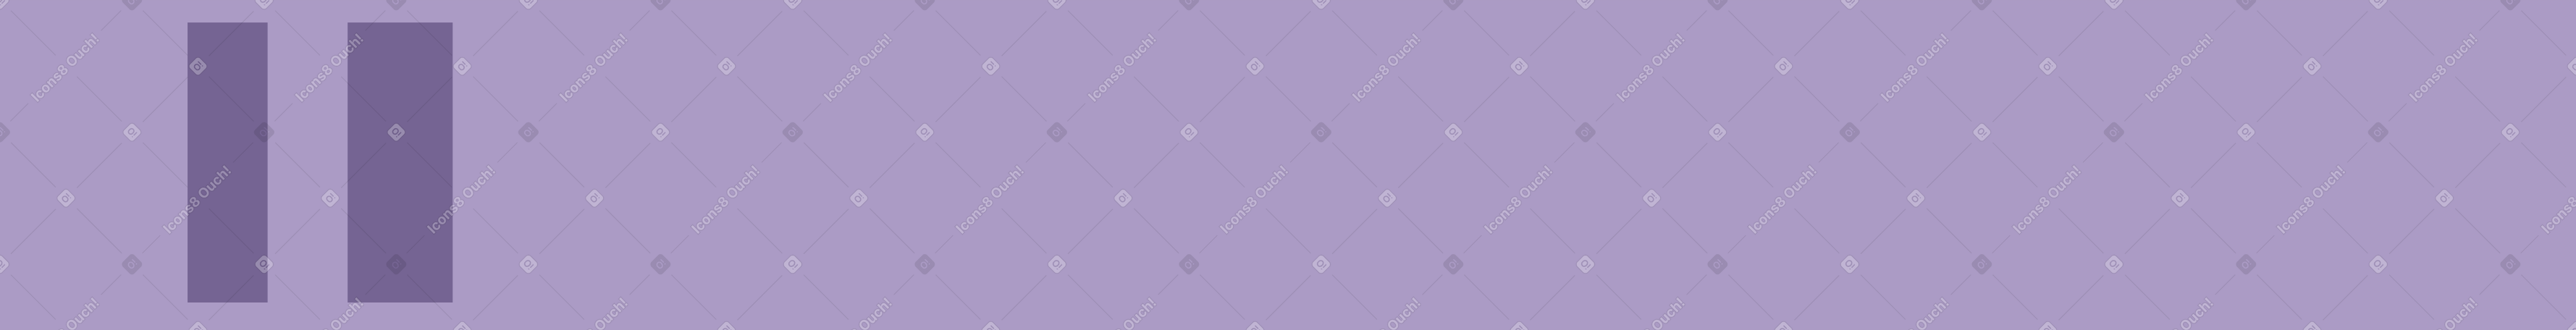 lilac folder with documents Illustration in PNG, SVG